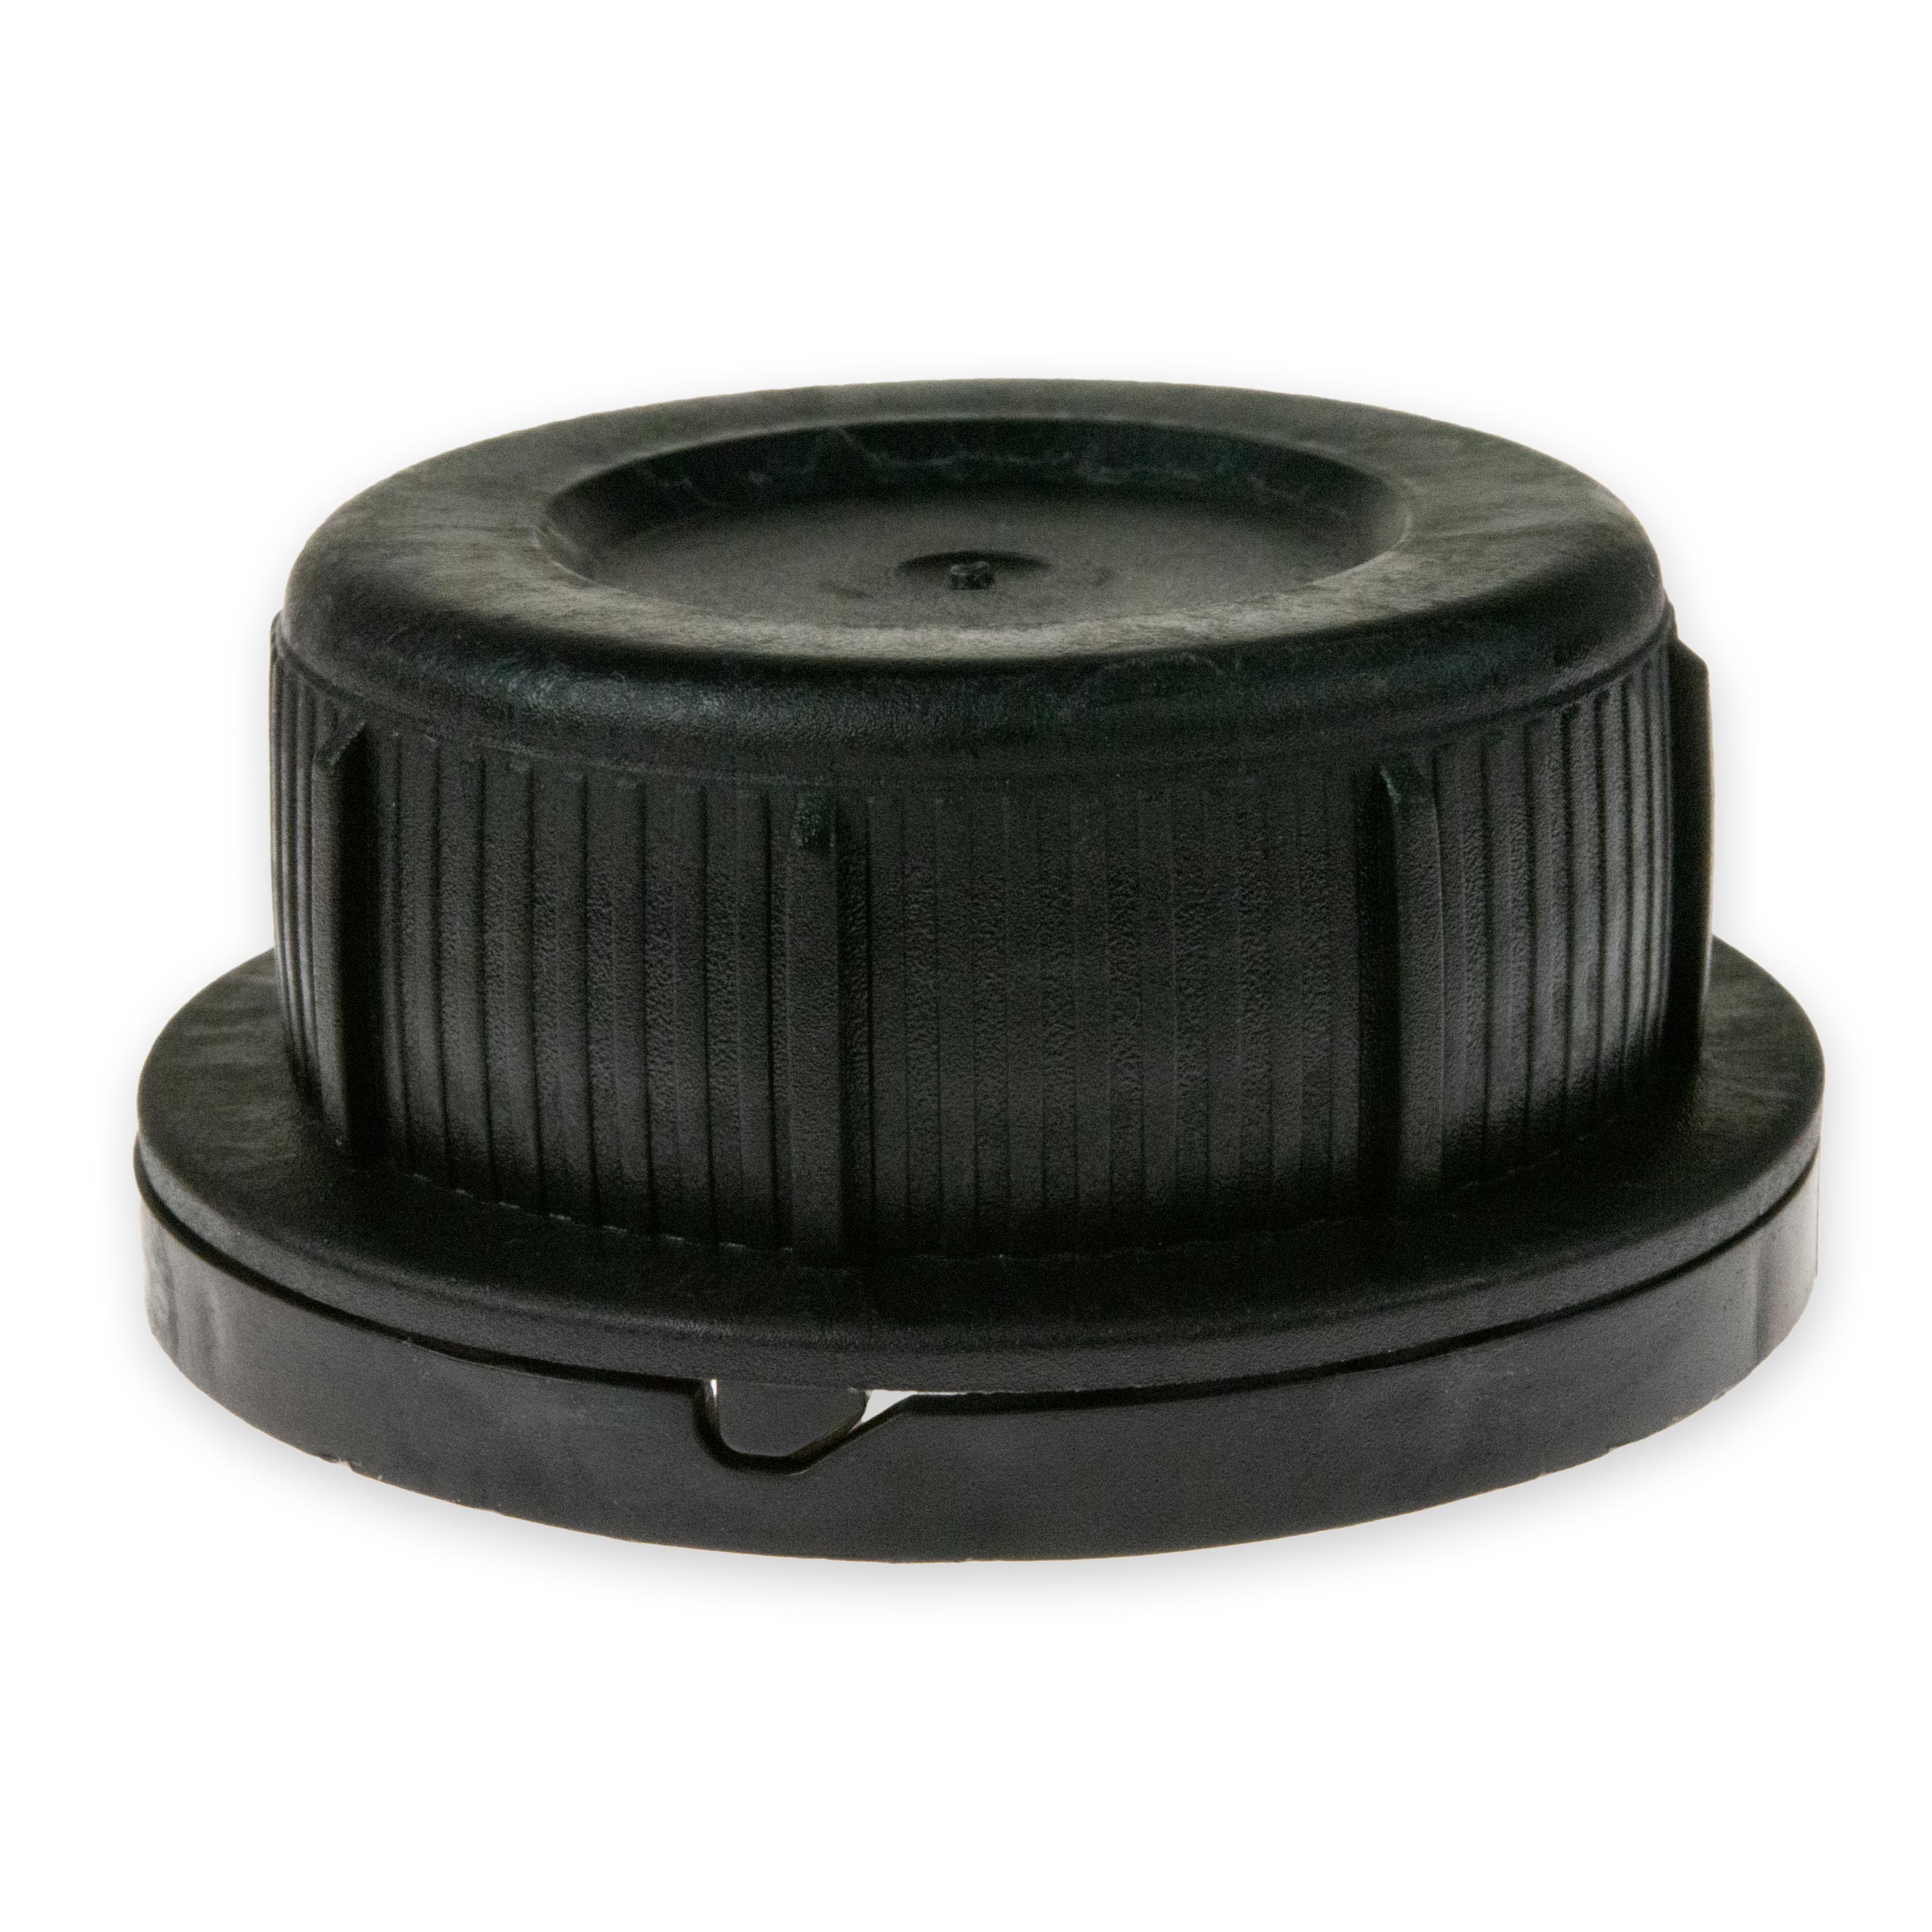 UN-Closures 45 of HDPE for canisters black